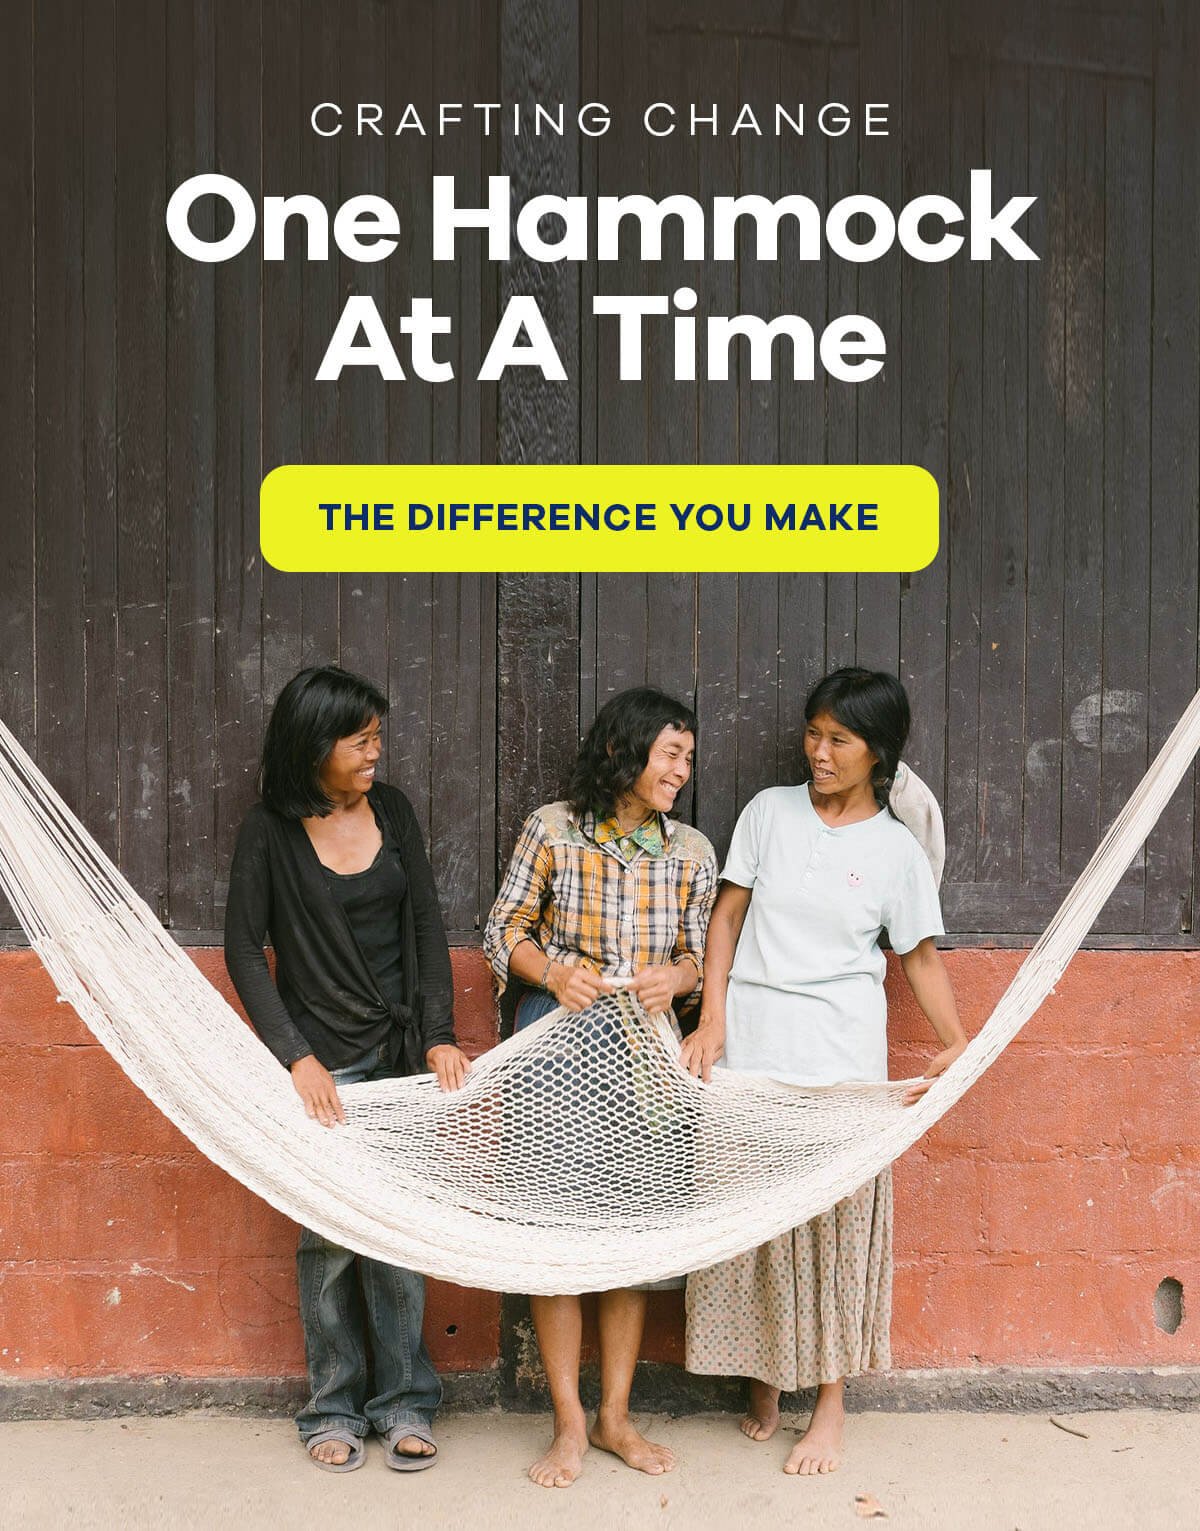 Crafting Change One Hammock At A Time THE DIFFERENCE YOU MAKE